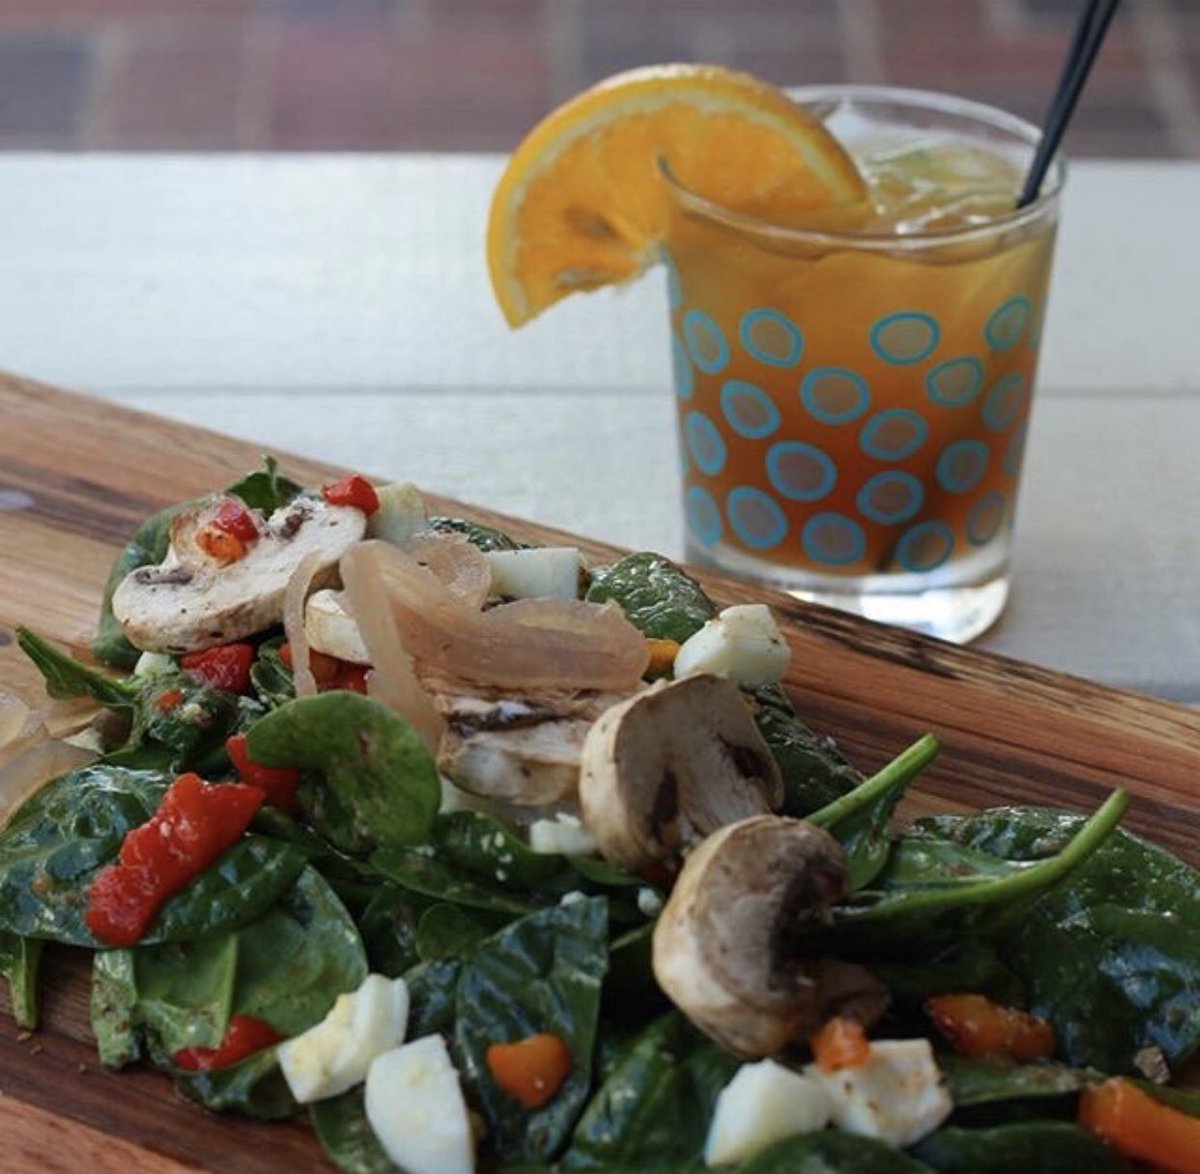 This is what balance looks like: Spinach Salad & a cocktail!

#comegetsome #spinachsalad #warmbaconvinaigrette